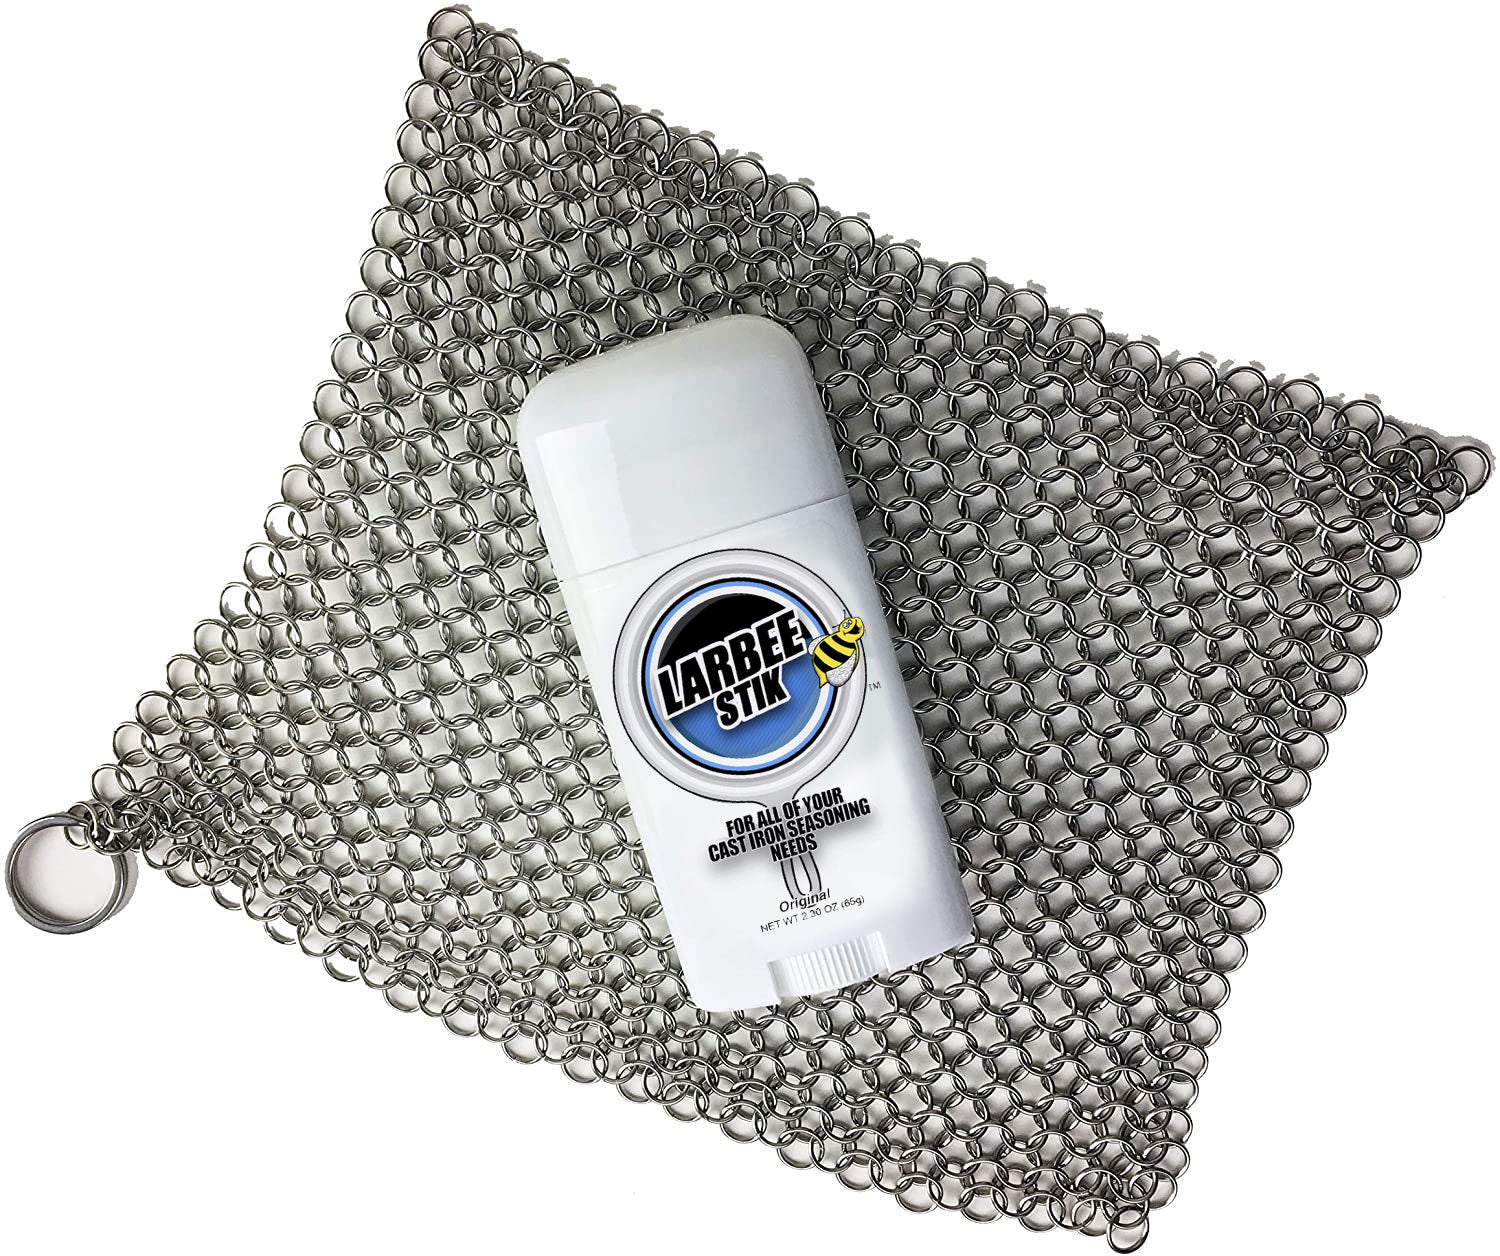 https://crisbee.org/cdn/shop/products/ChainMailScrubberCastIronCleaner_LarbeeStik.jpg?v=1643848989&width=1946